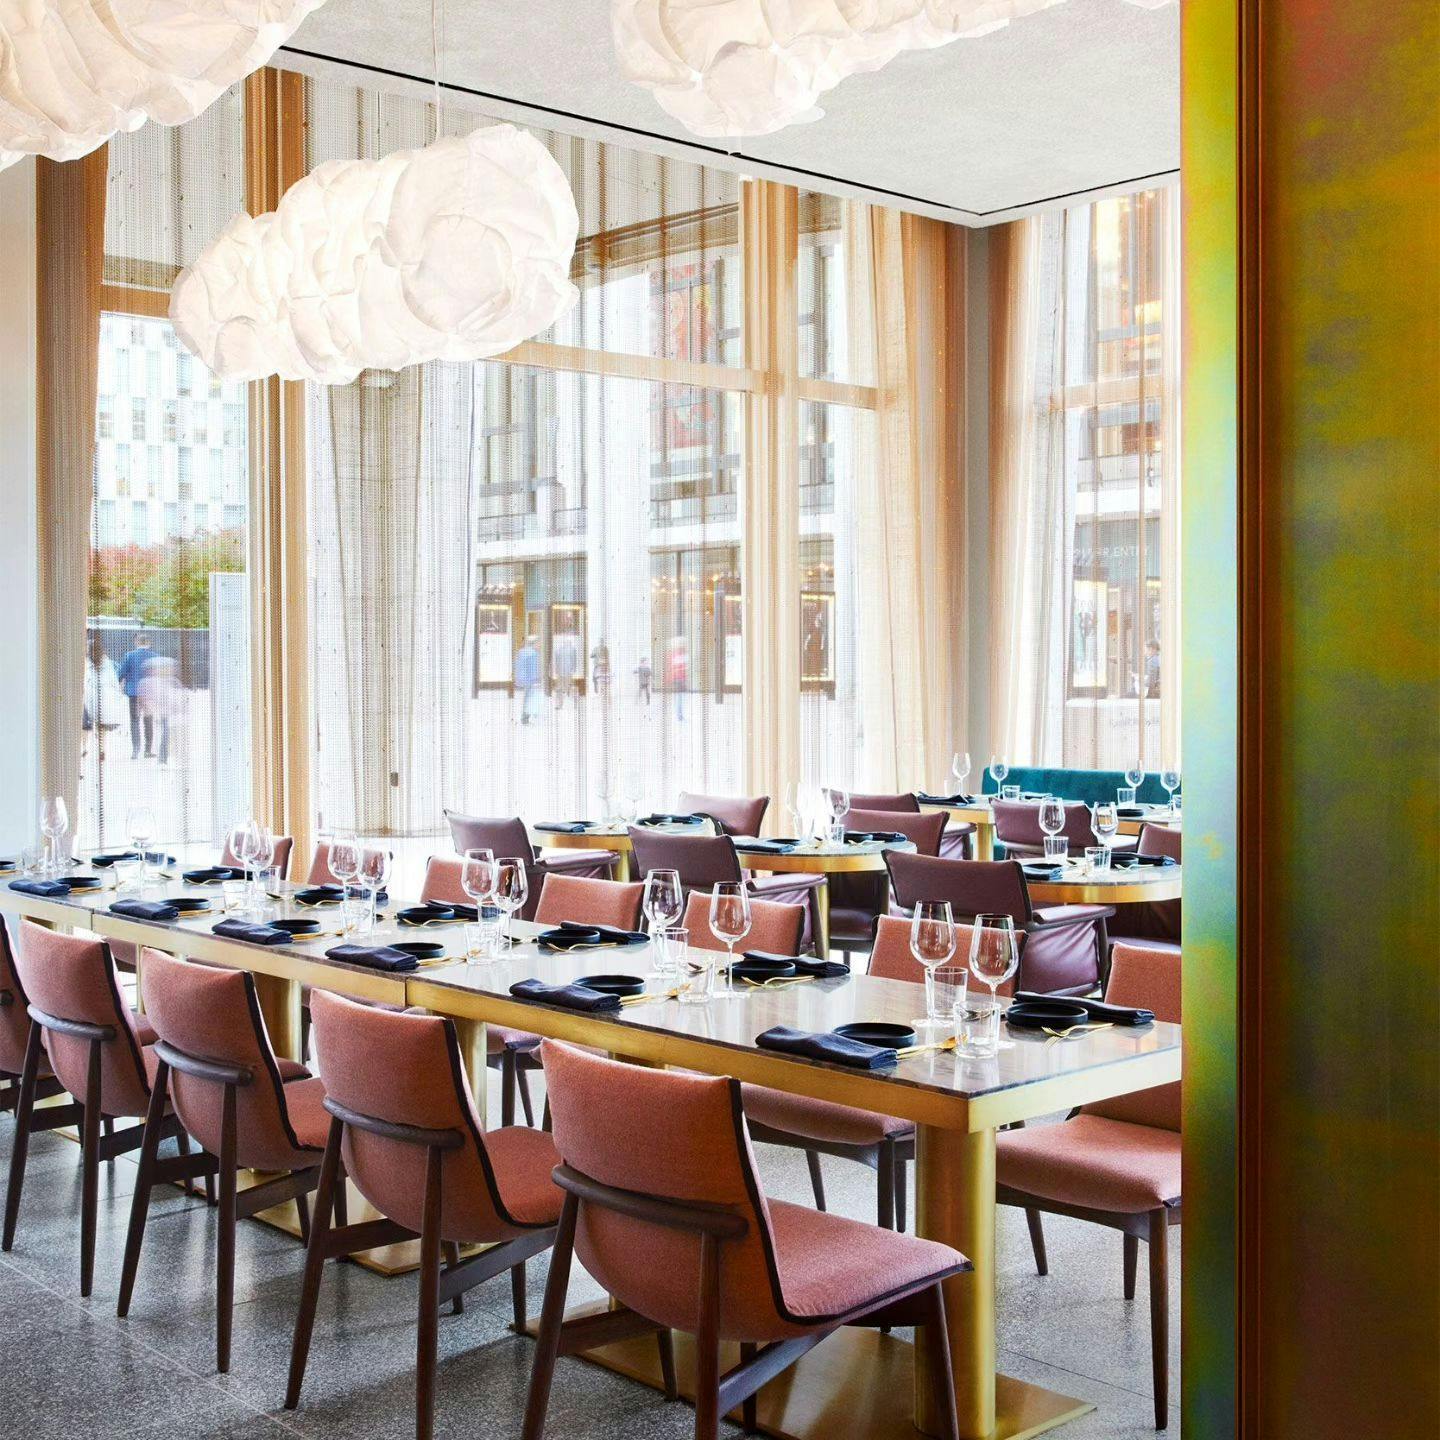 An elegant, modern restaurant interior bathed in natural light, featuring chic furniture and pristine table settings, inviting a sophisticated dining experience offered through Booked in New York.